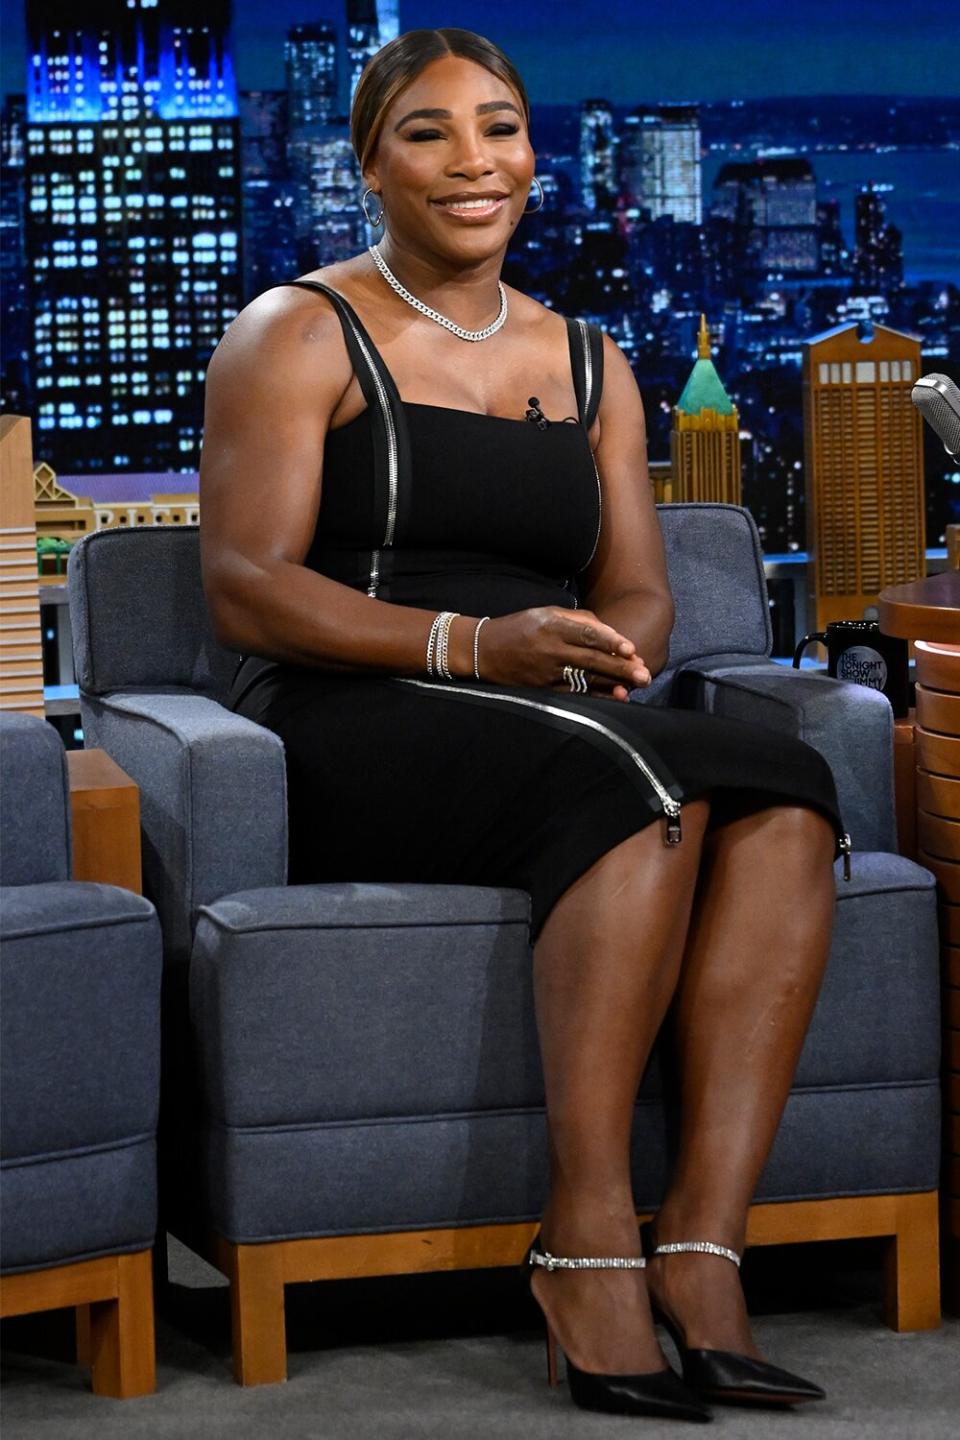 THE TONIGHT SHOW STARRING JIMMY FALLON -- Episode 1708 -- Pictured: Tennis player Serena Williams during an interview on Tuesday, September 13, 2022